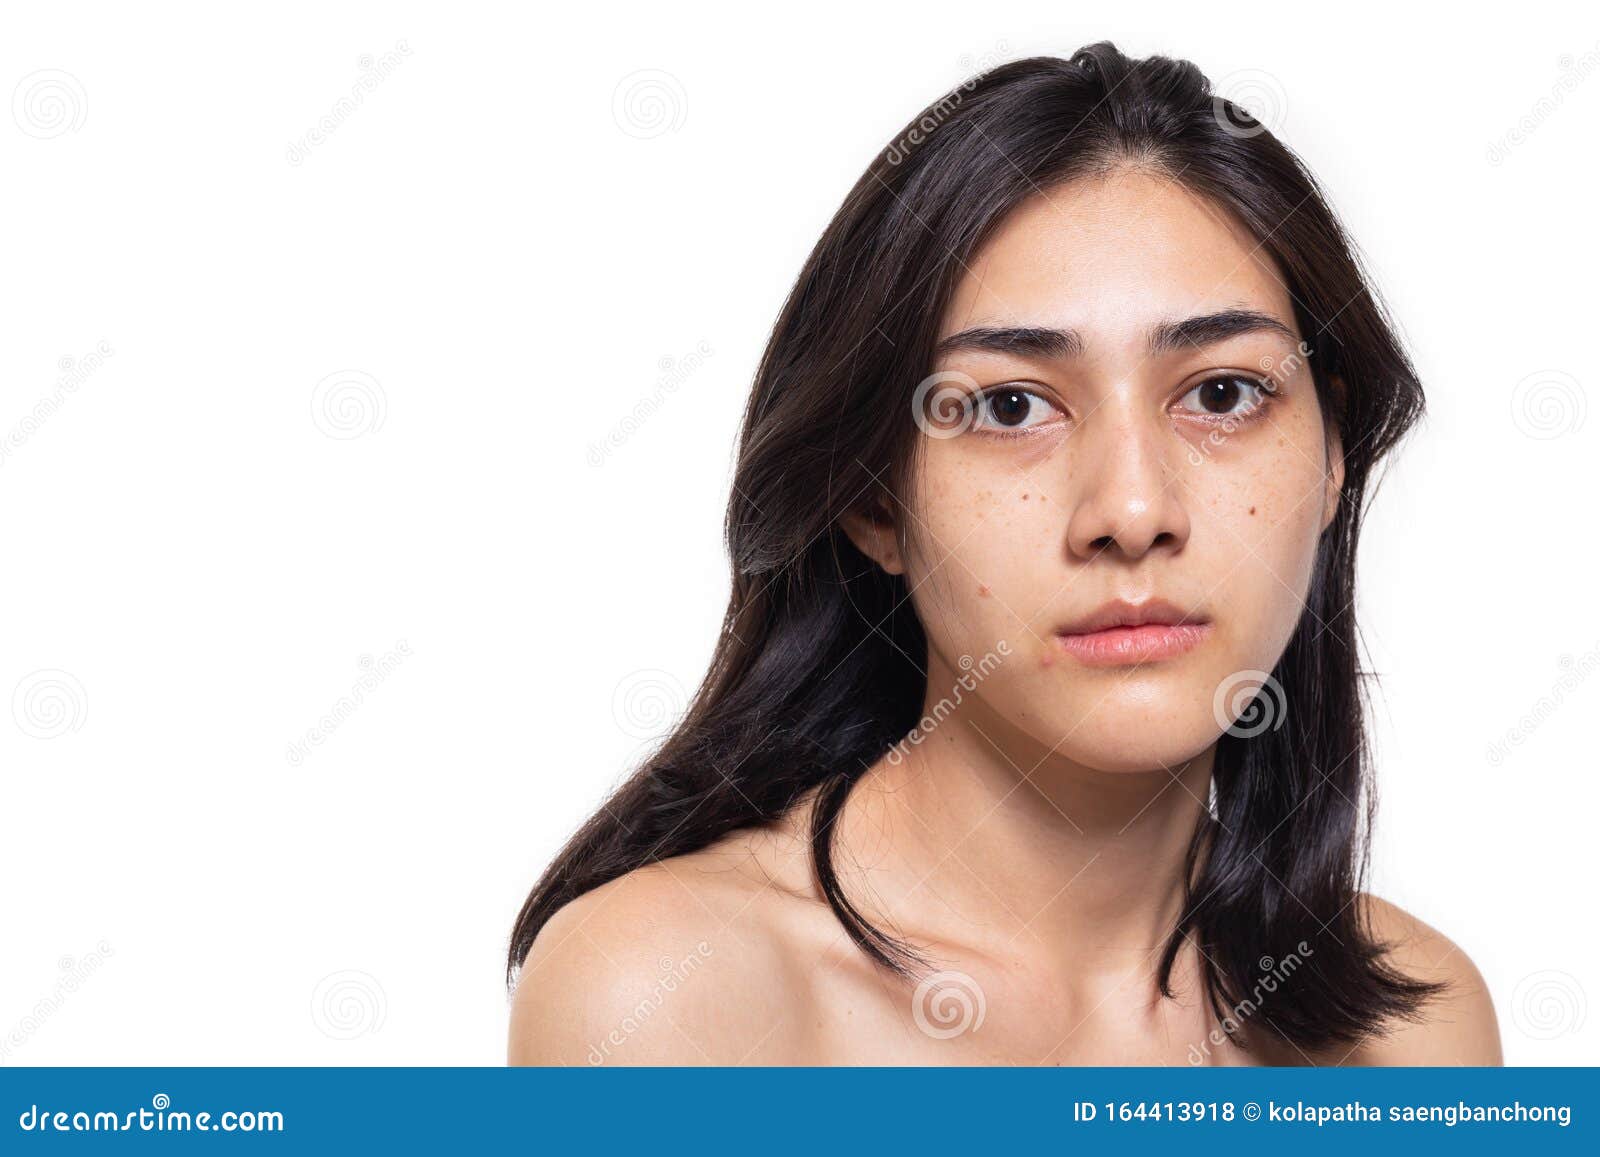 freckles, blemish, pimple, acne and dull skin on her beautiful asian face. asian woman gets sad, beautiful young woman get problem